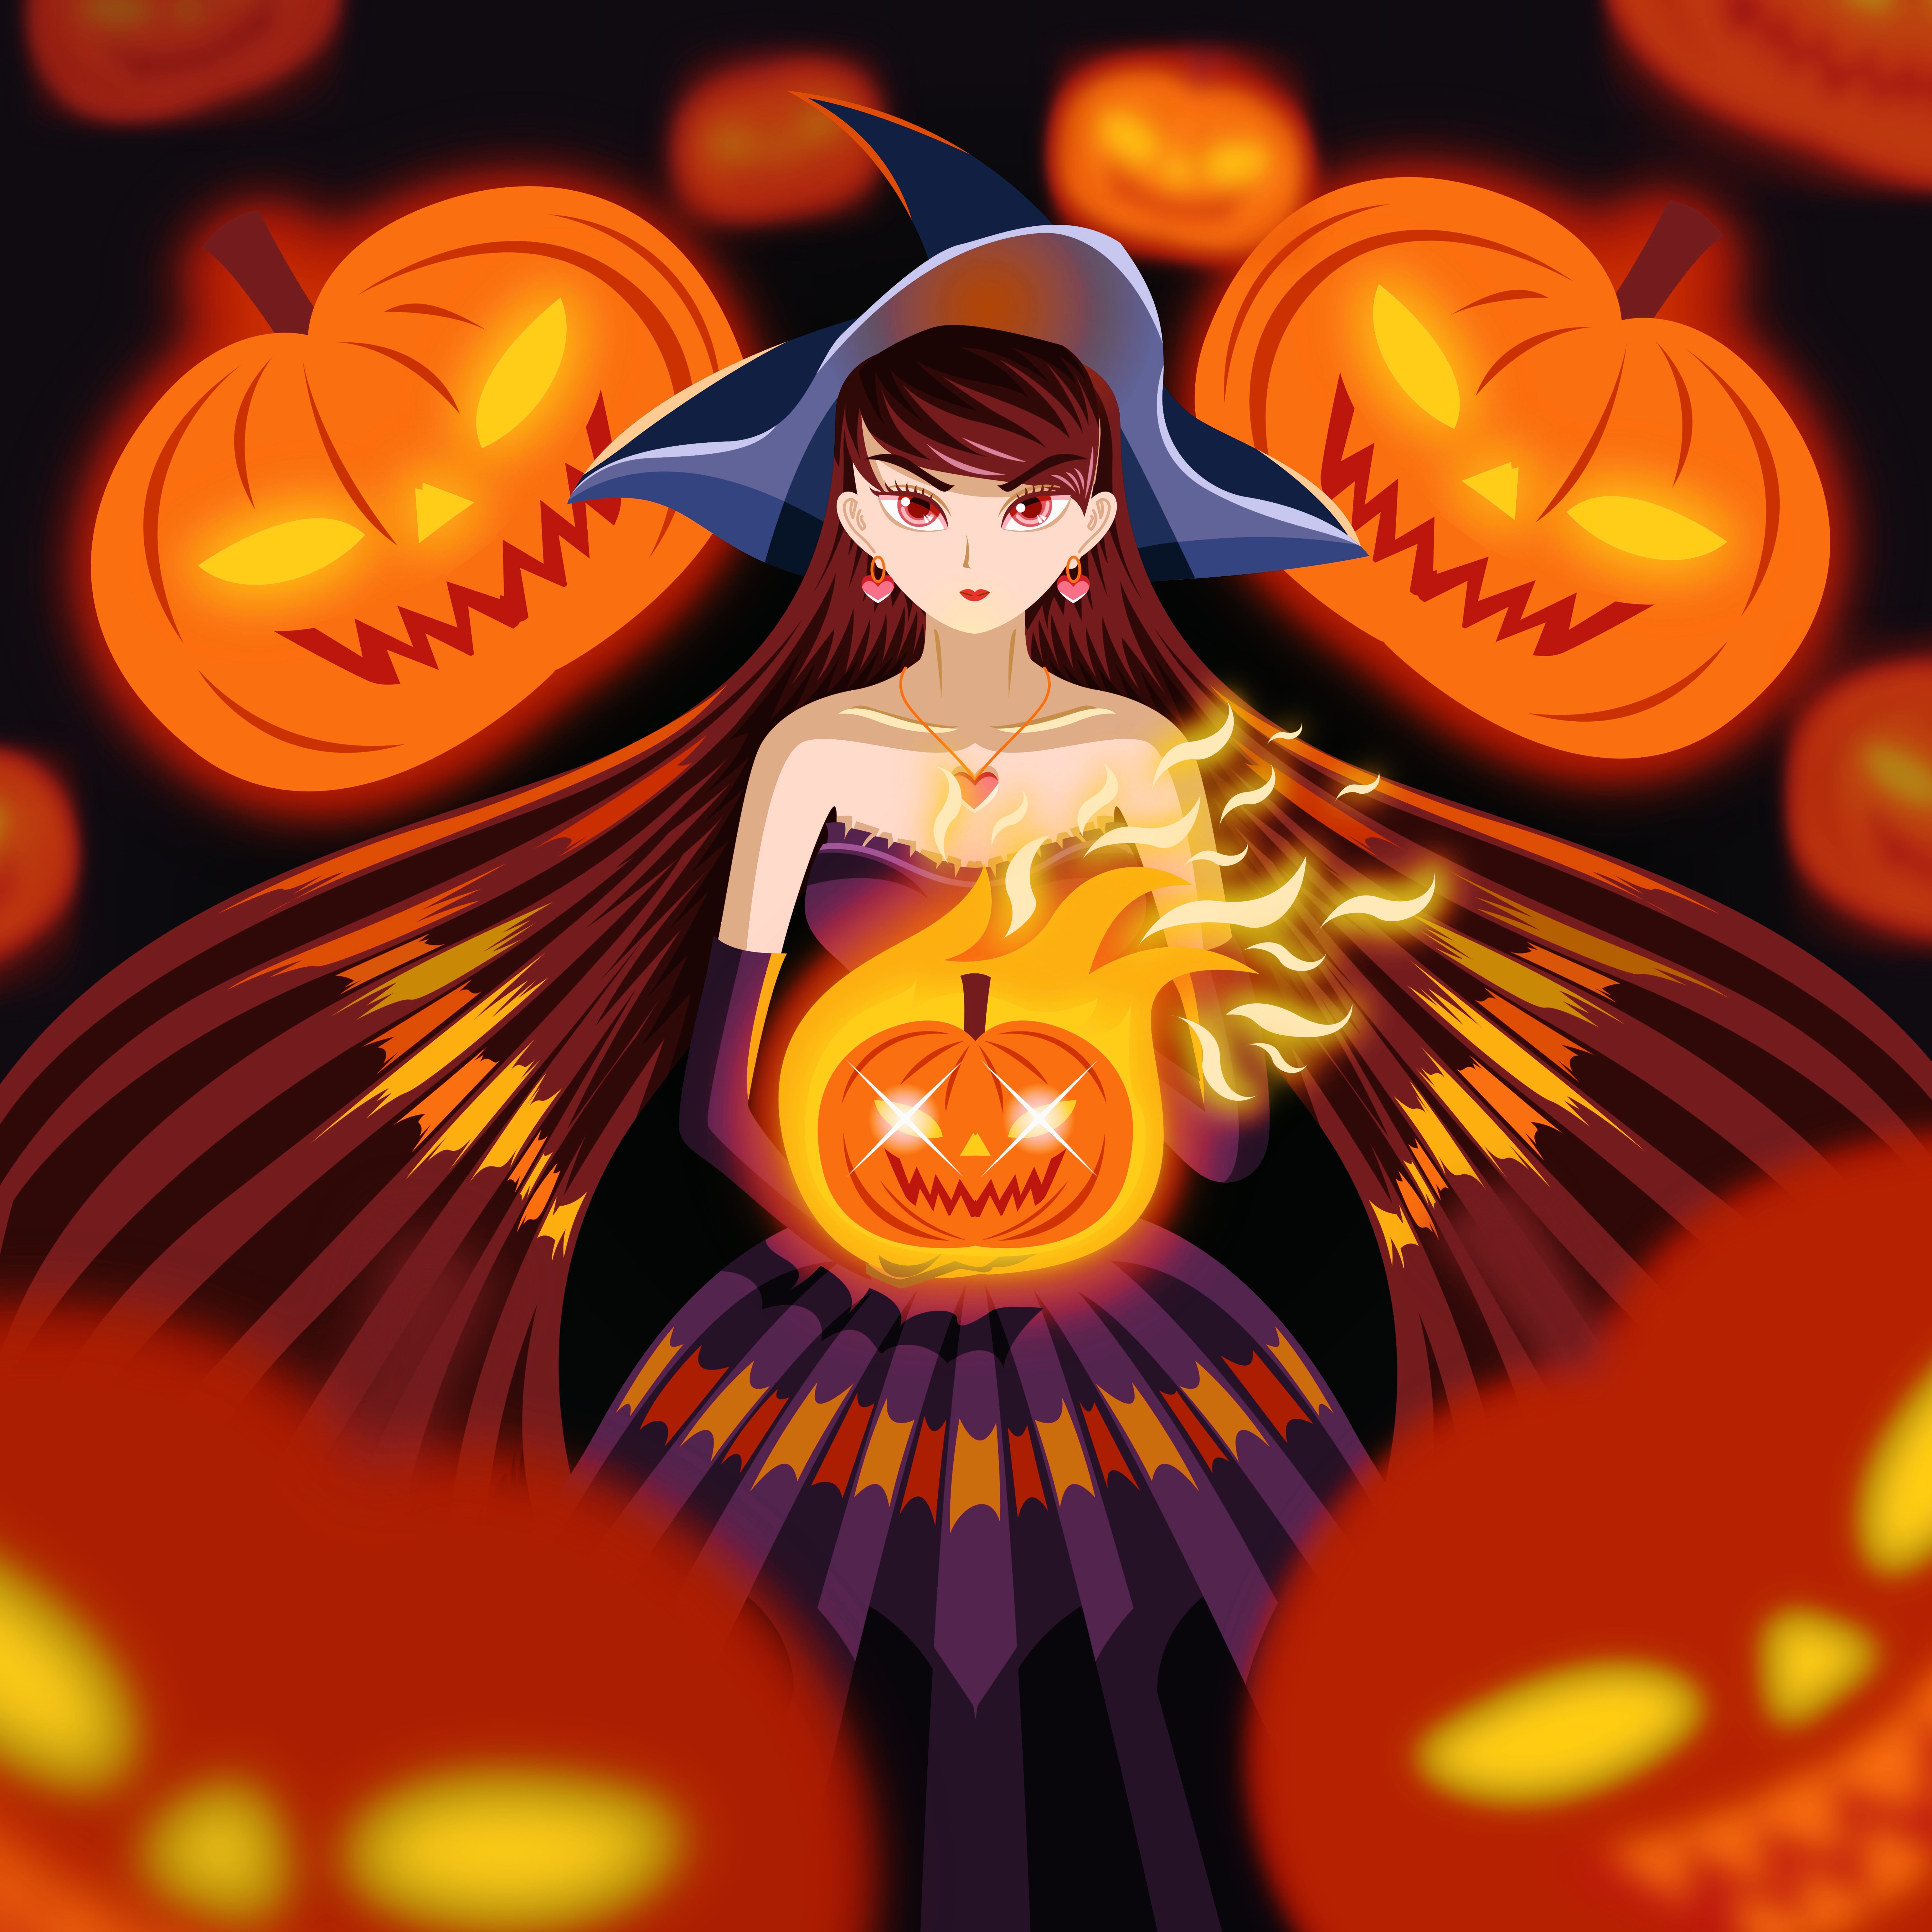 Cake, the pumpkin witch